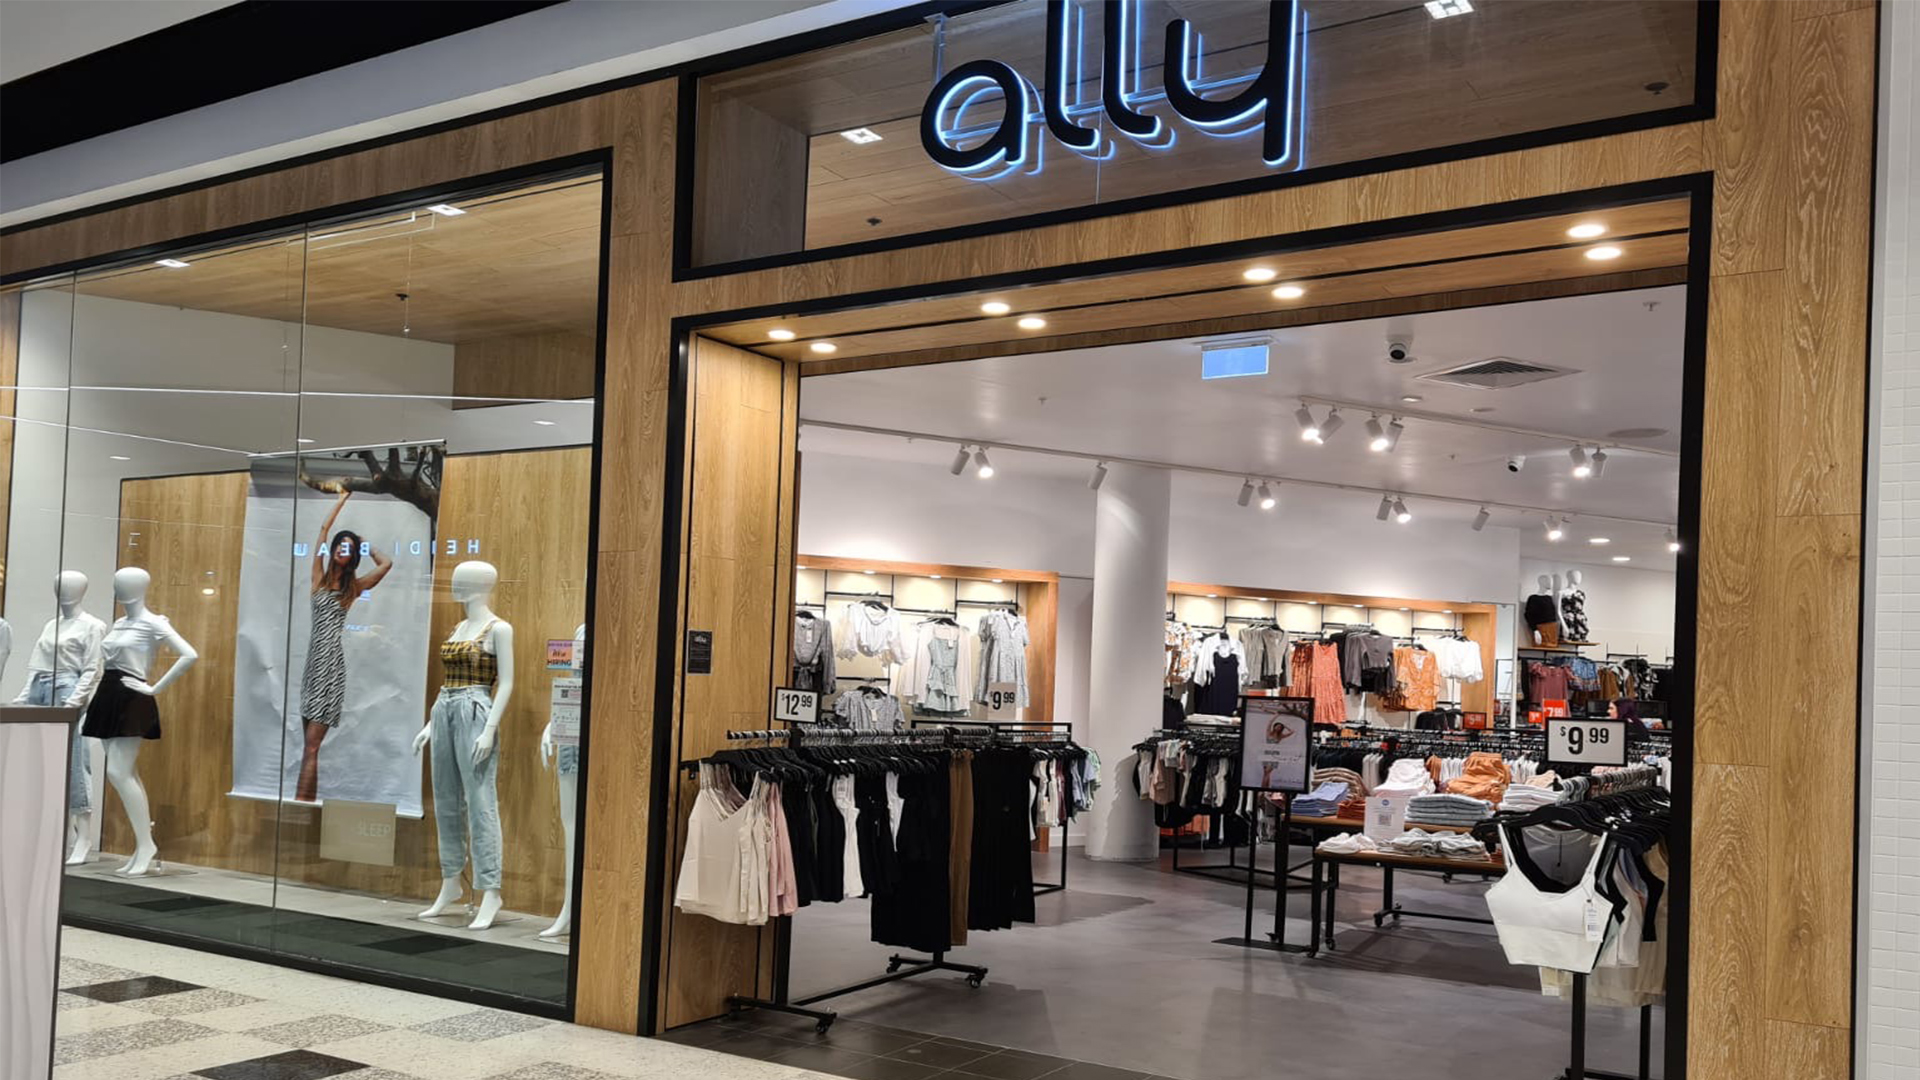 Ally Fashion - 1 of over 140 stores in Australia! 😍🙌🏽 Who will